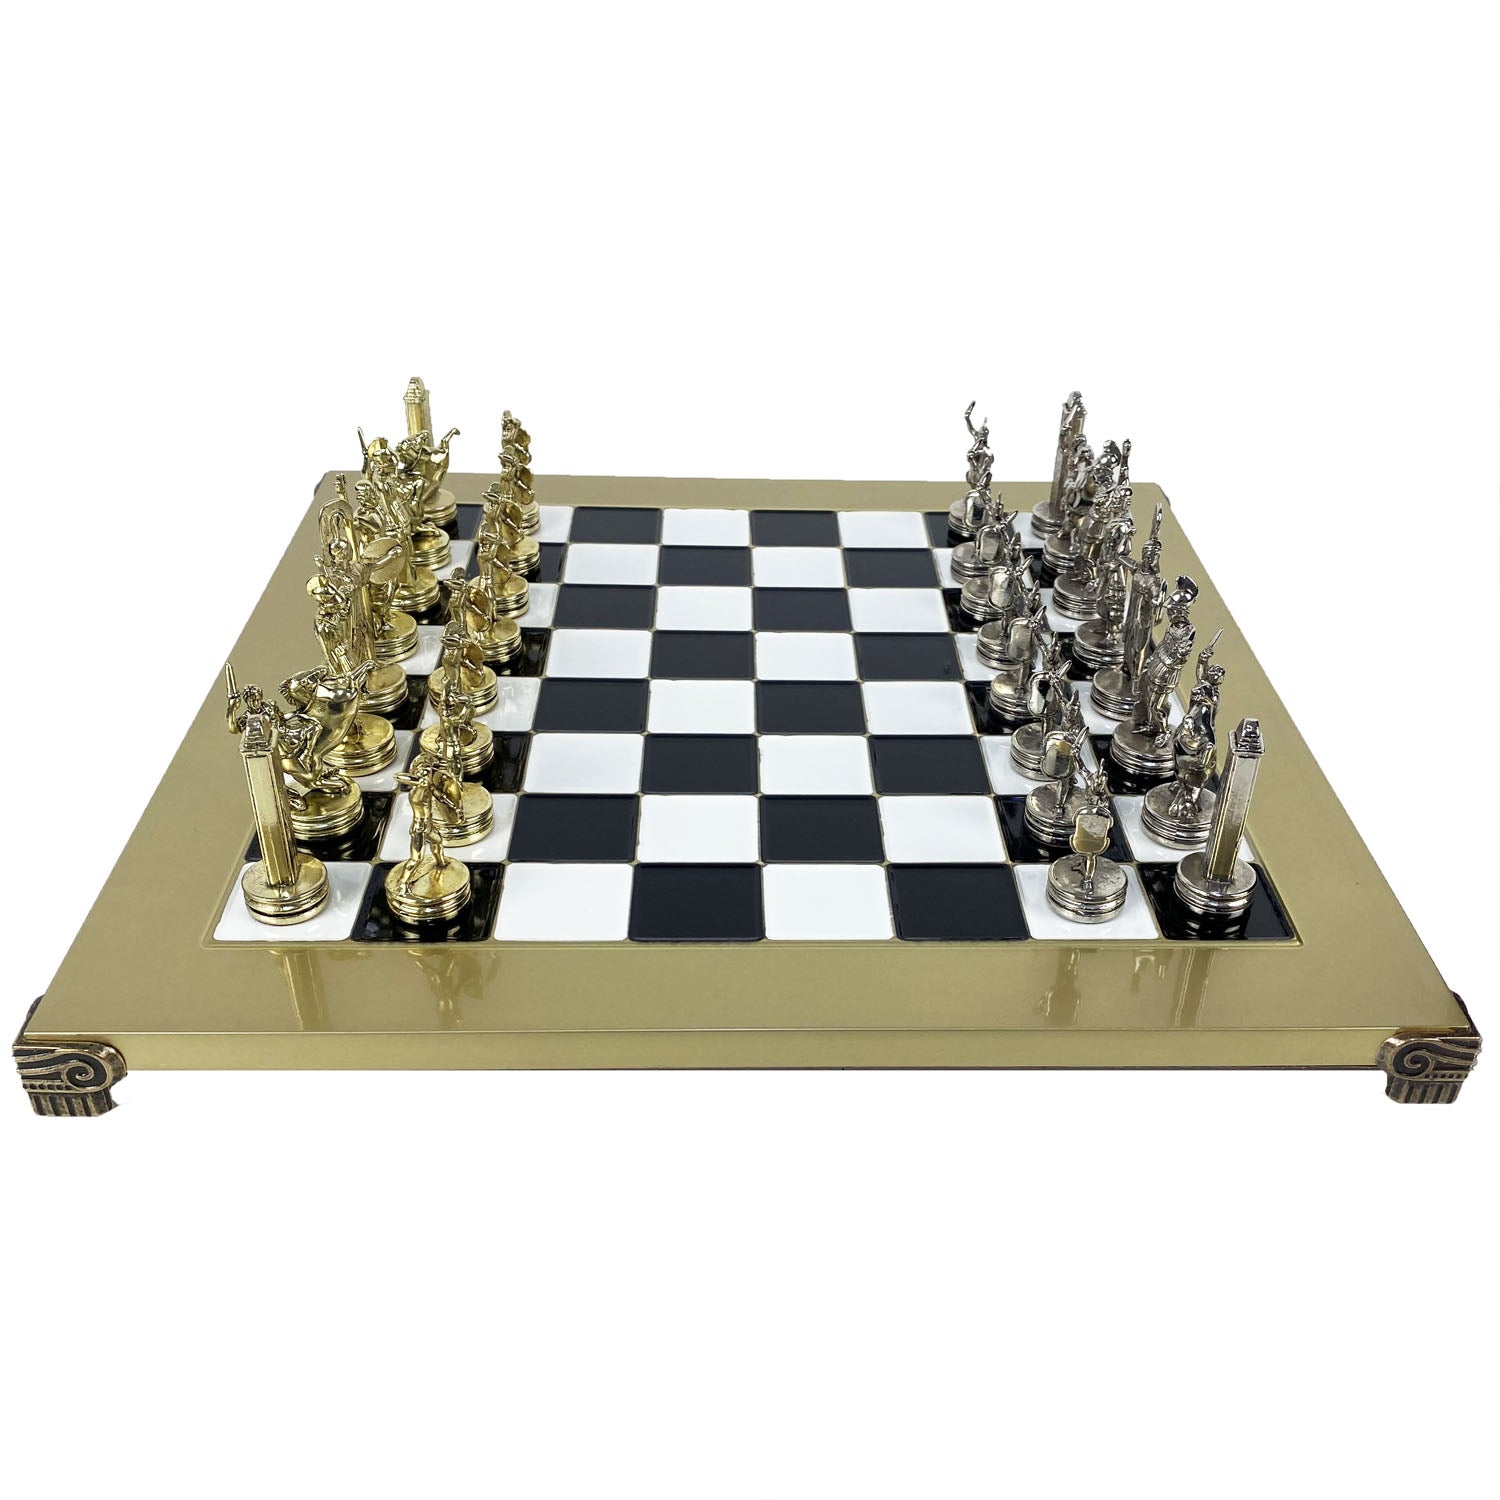 Medieval Themed Chess Board - Gold & Silver - Medium